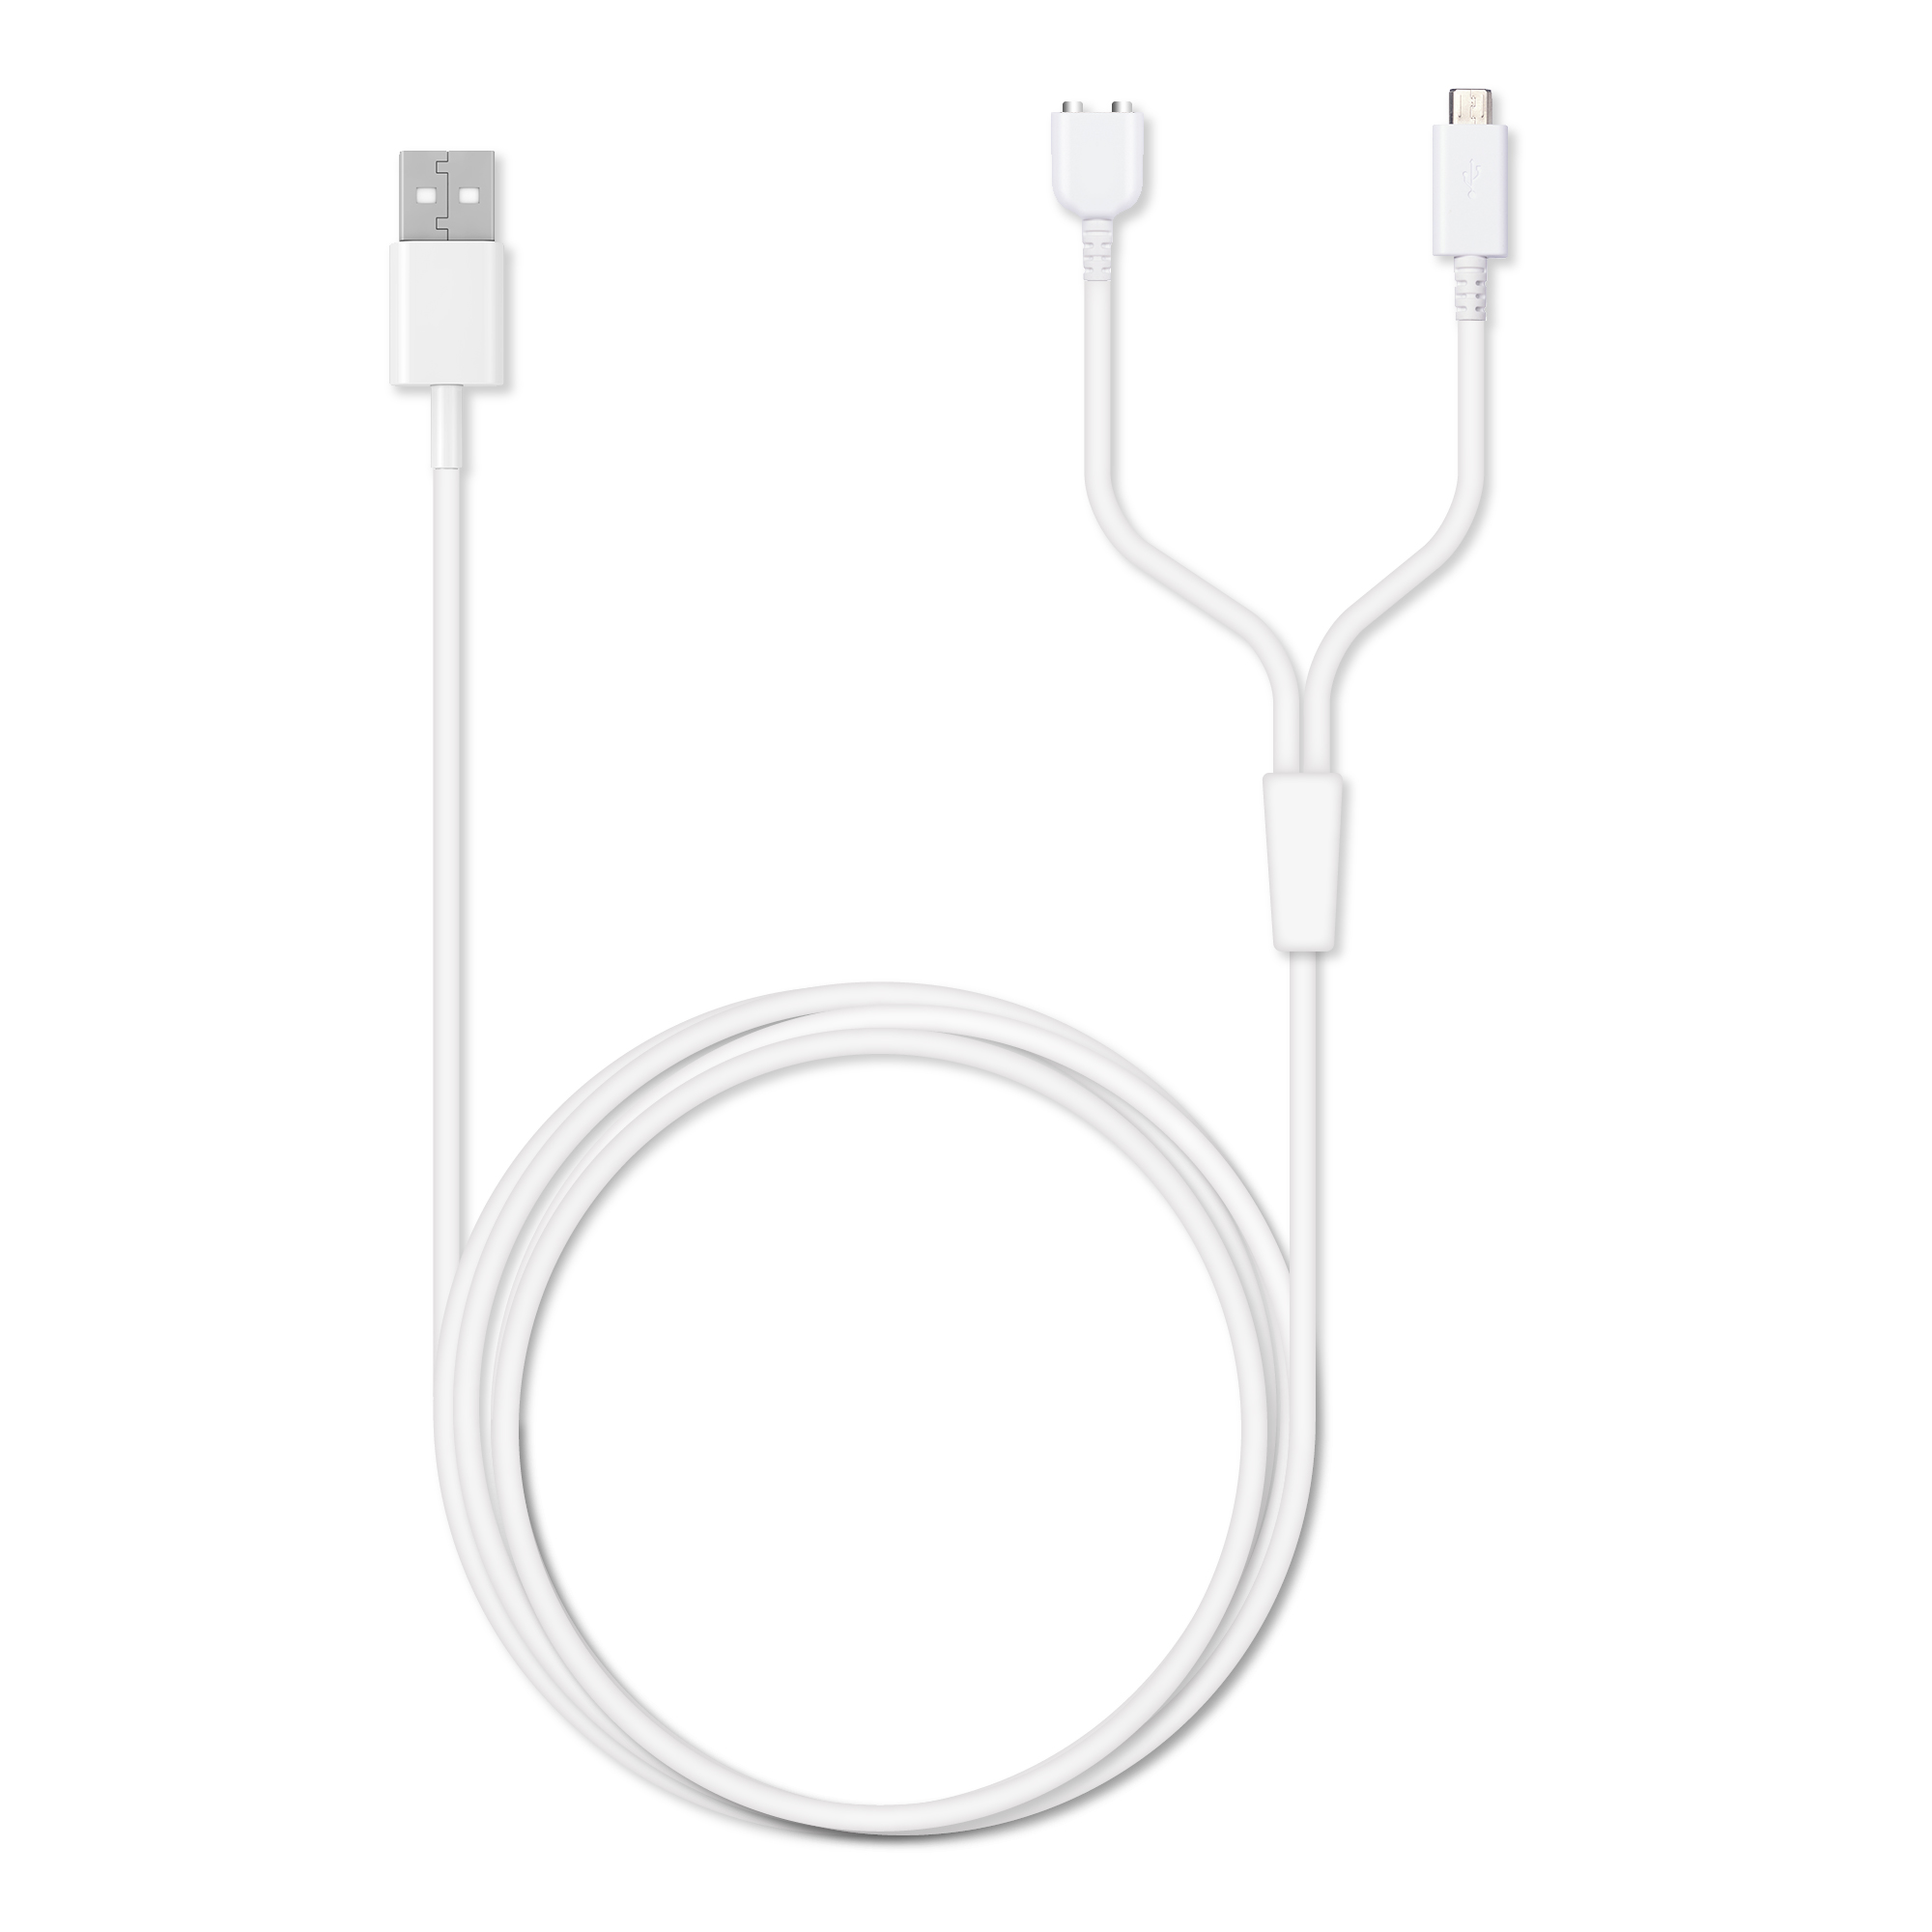 NU-007 USB Charging Cable